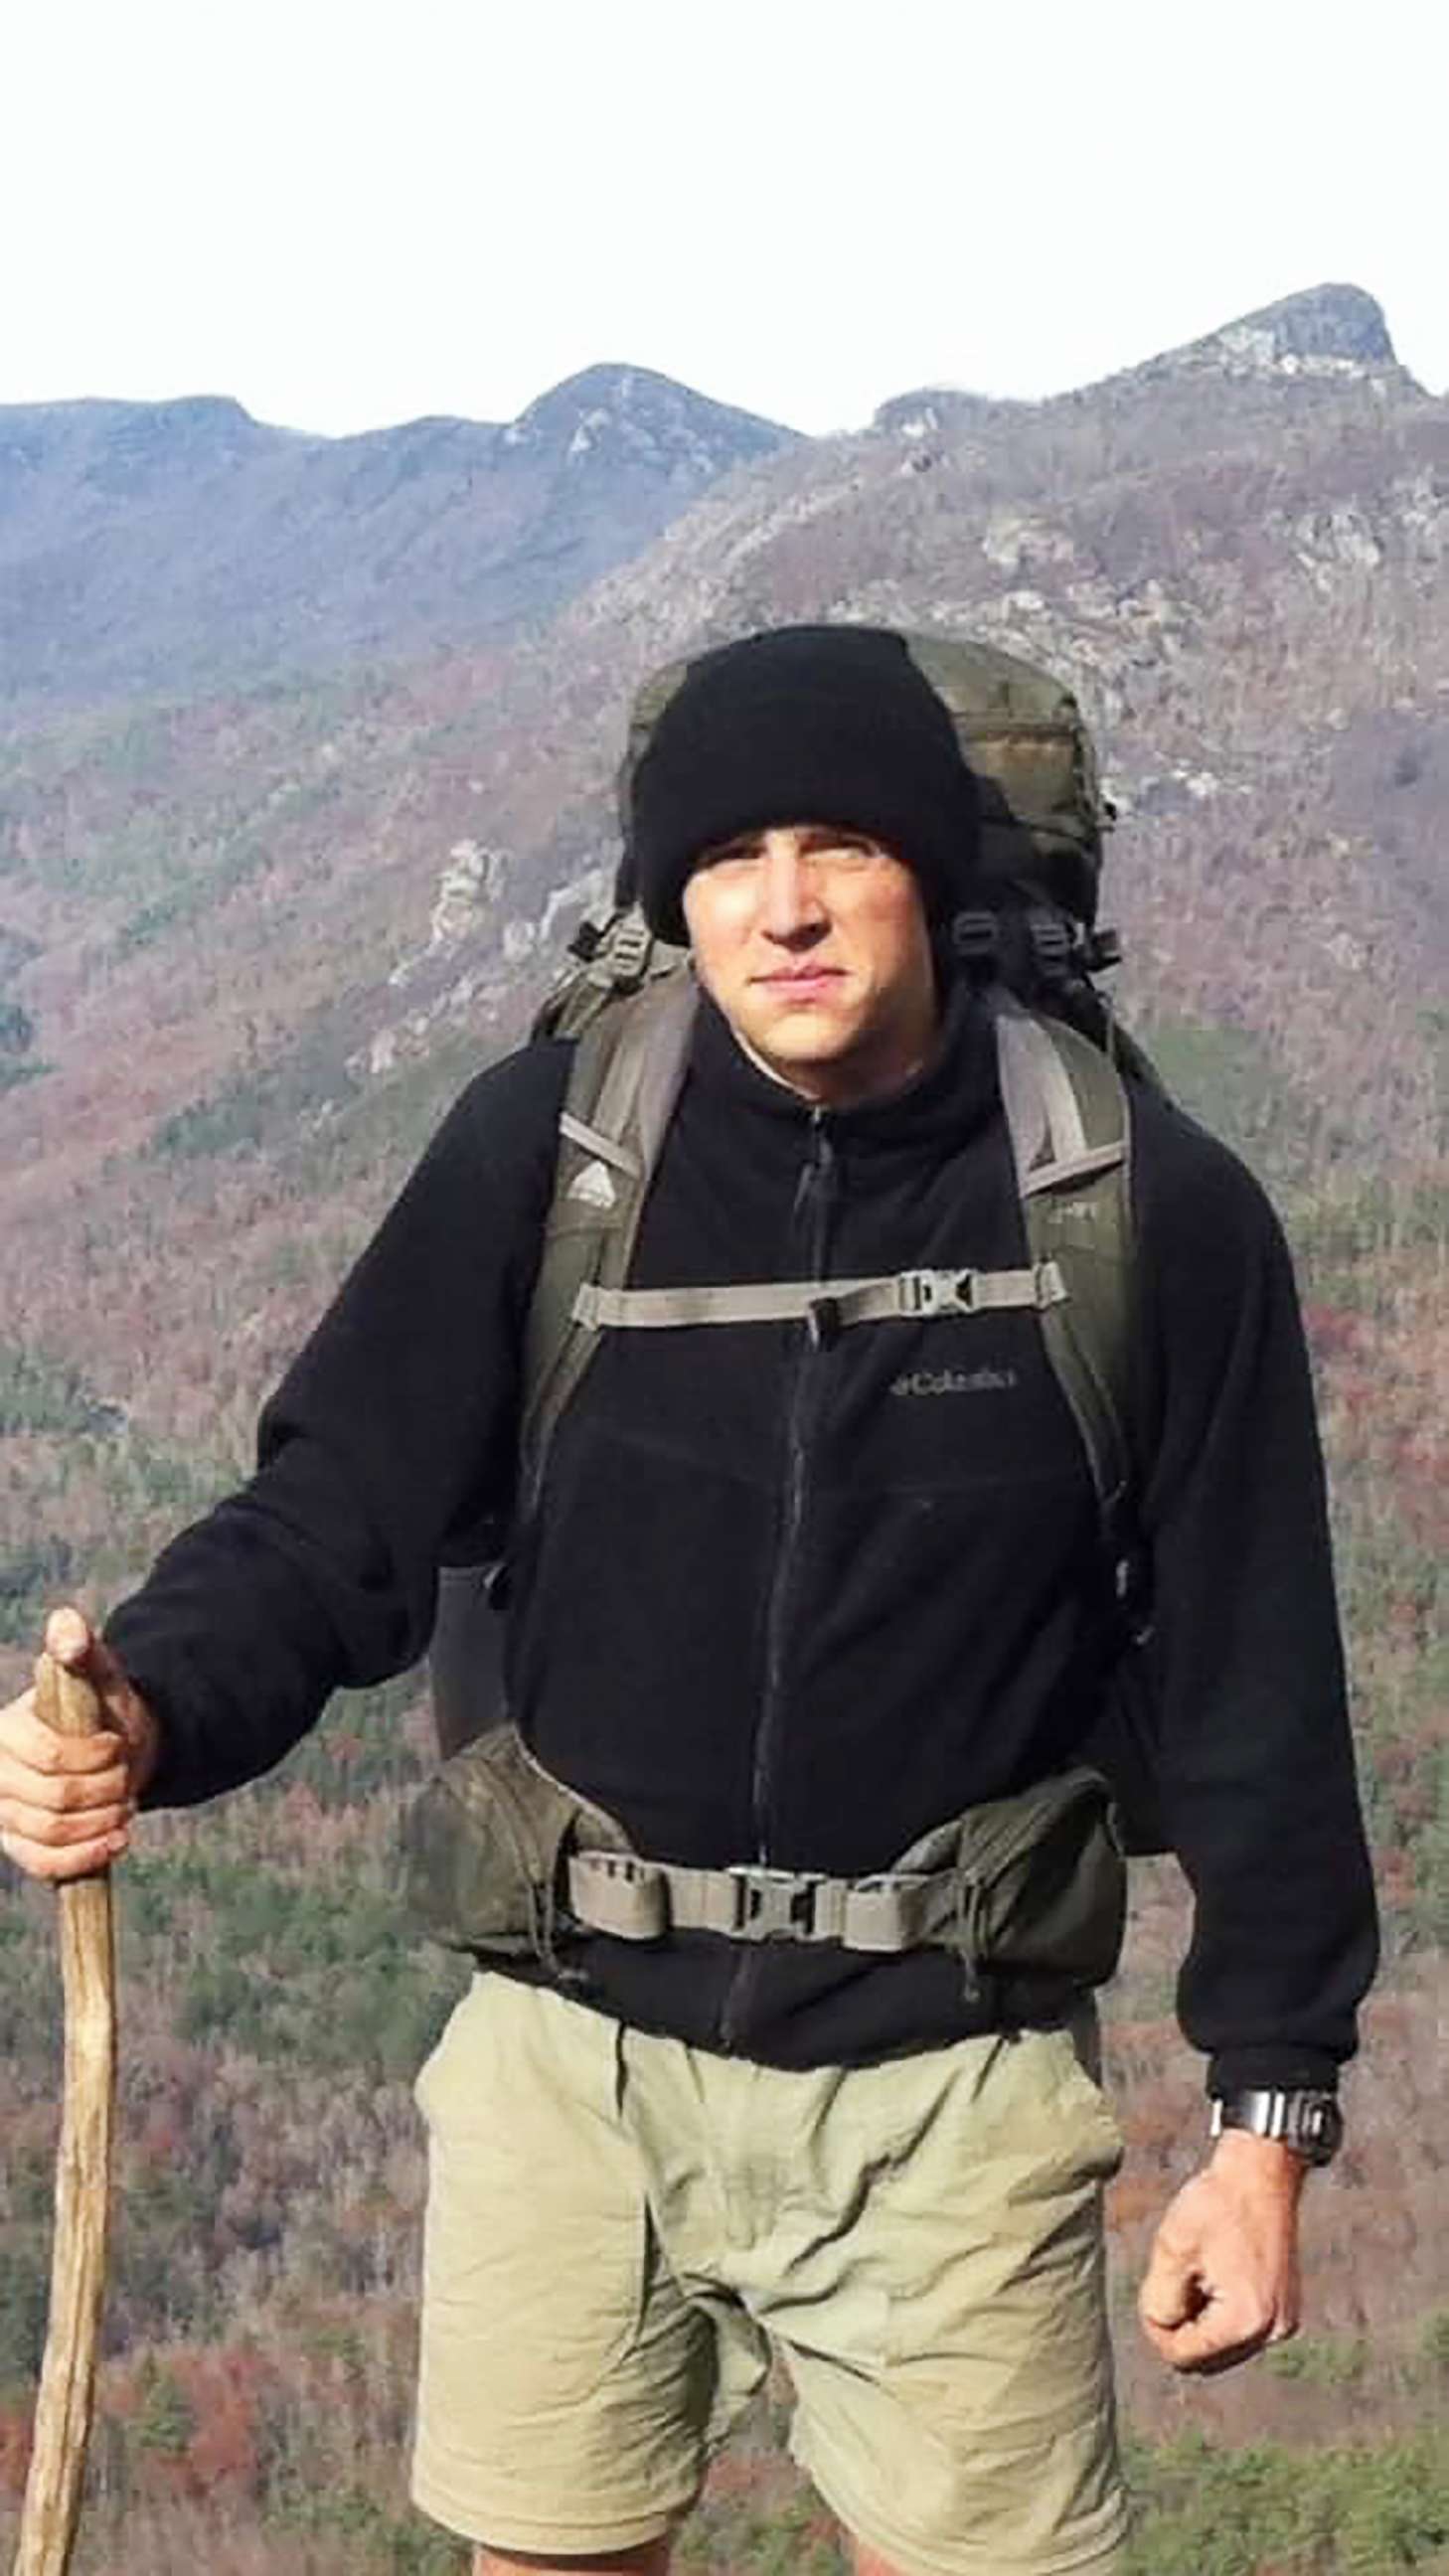 PHOTO: 1st Lt. Matthew Kraft has been reported missing to local law enforcement after missing his return date from a backcountry skiing trip on the Sierra High Route.